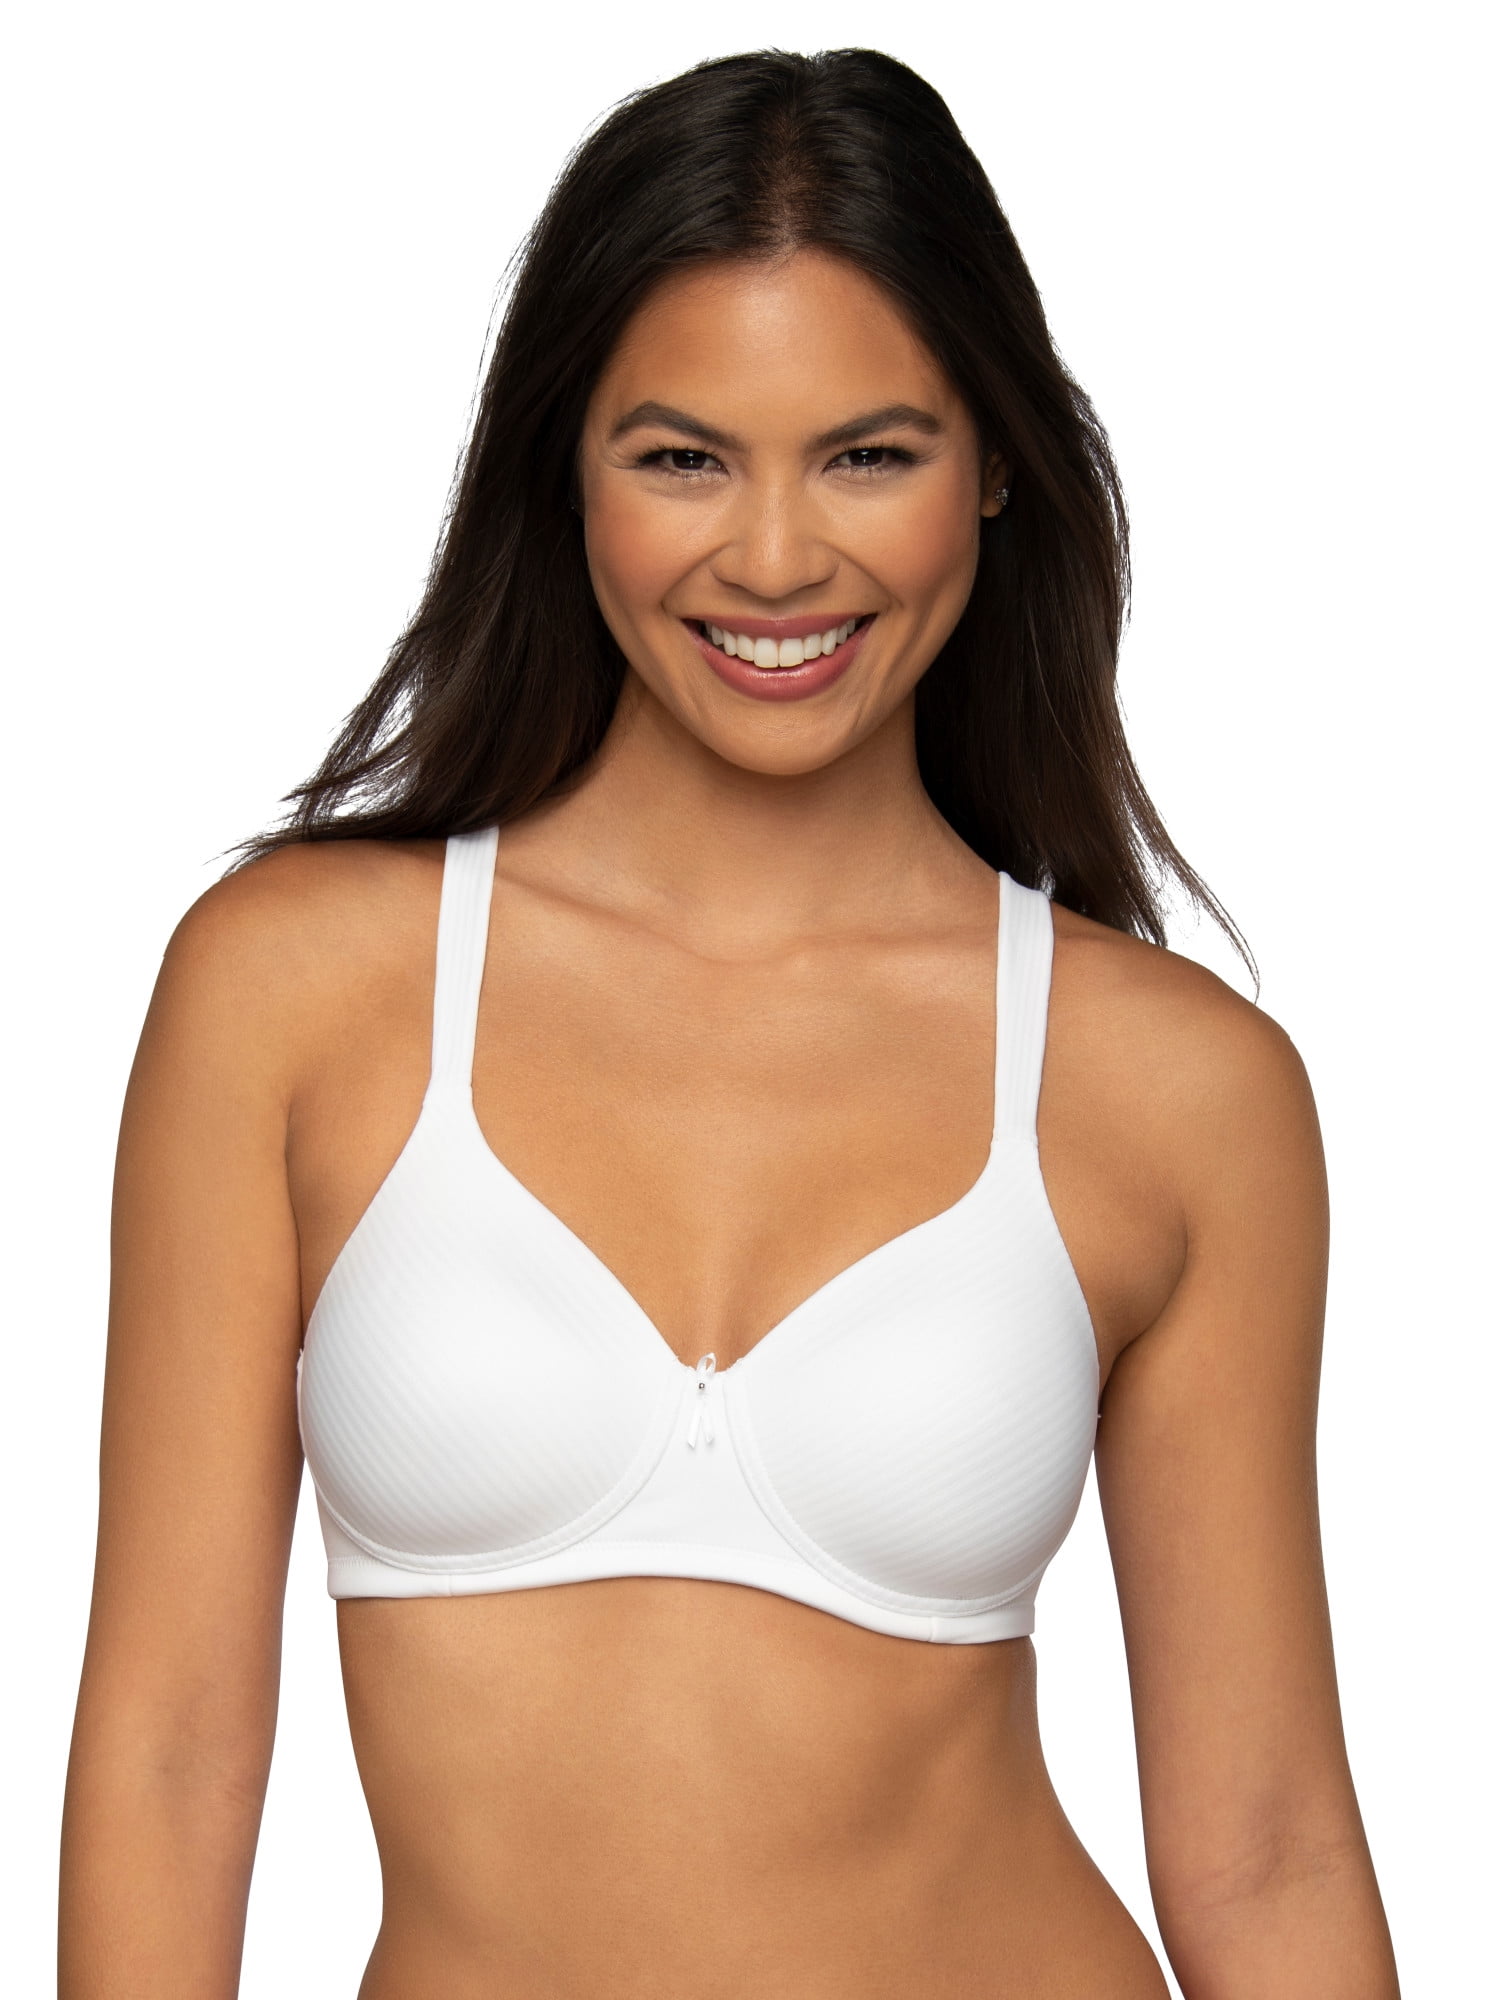 Vanity Fair Radiant Collection Women's Full Coverage Comfort Wirefree Bra,  Style 3472389 